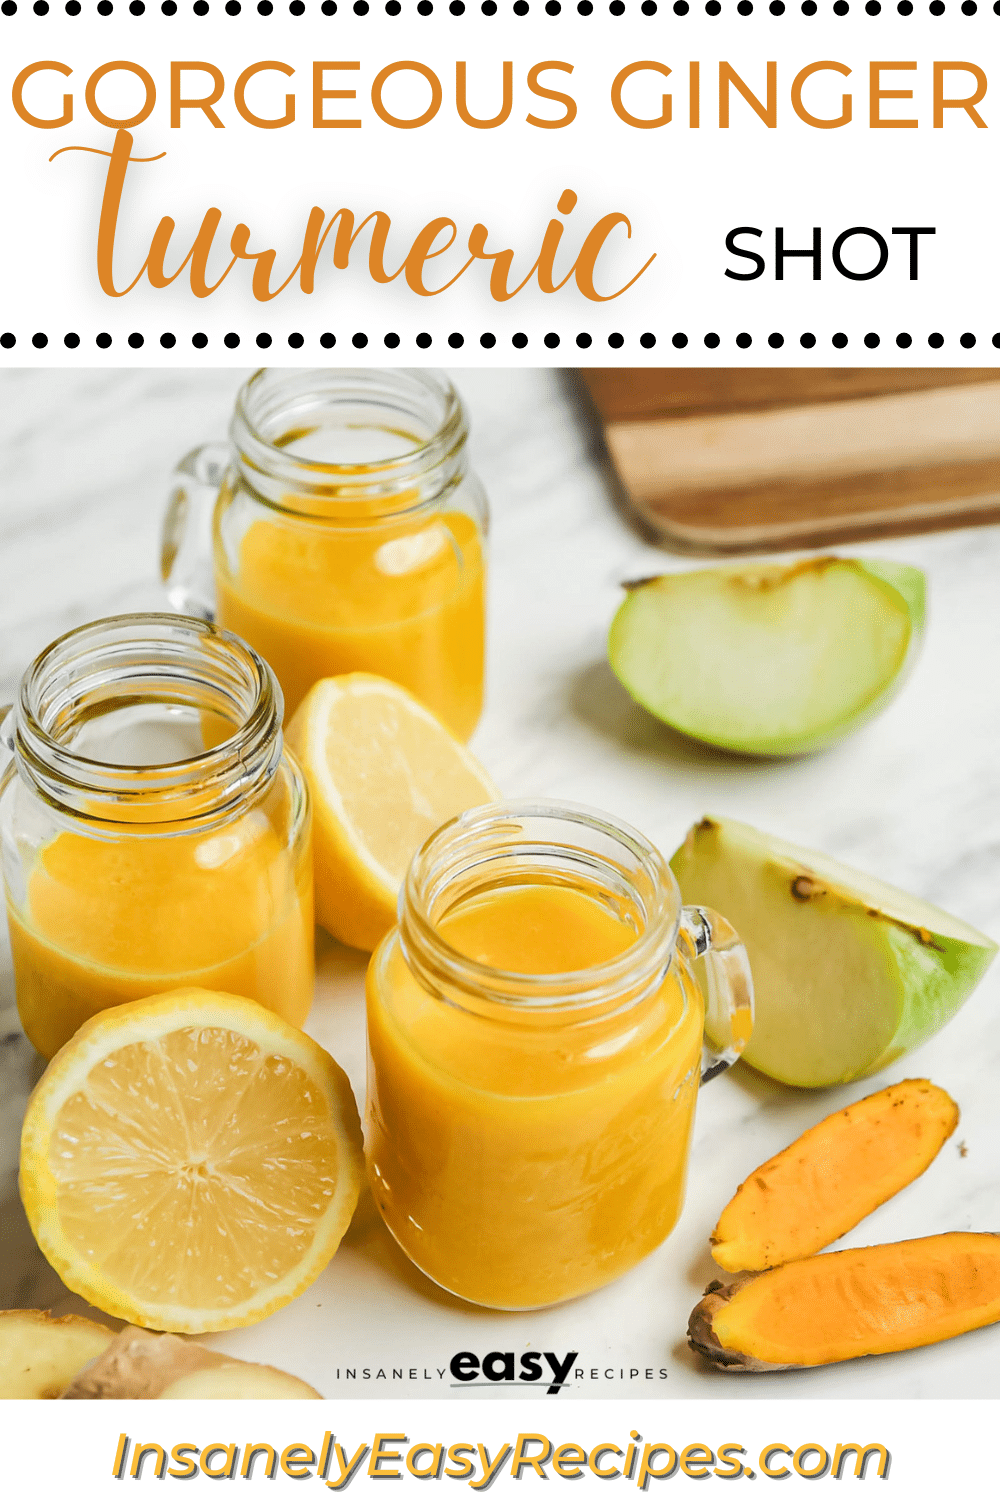 a small mason jar mug filled with orange ginger turmeric juice. Around the jar are pieces of apples, lemon, ginger, and turmeric root. text overlay at top of image says "gorgeous ginger turmeric shot"